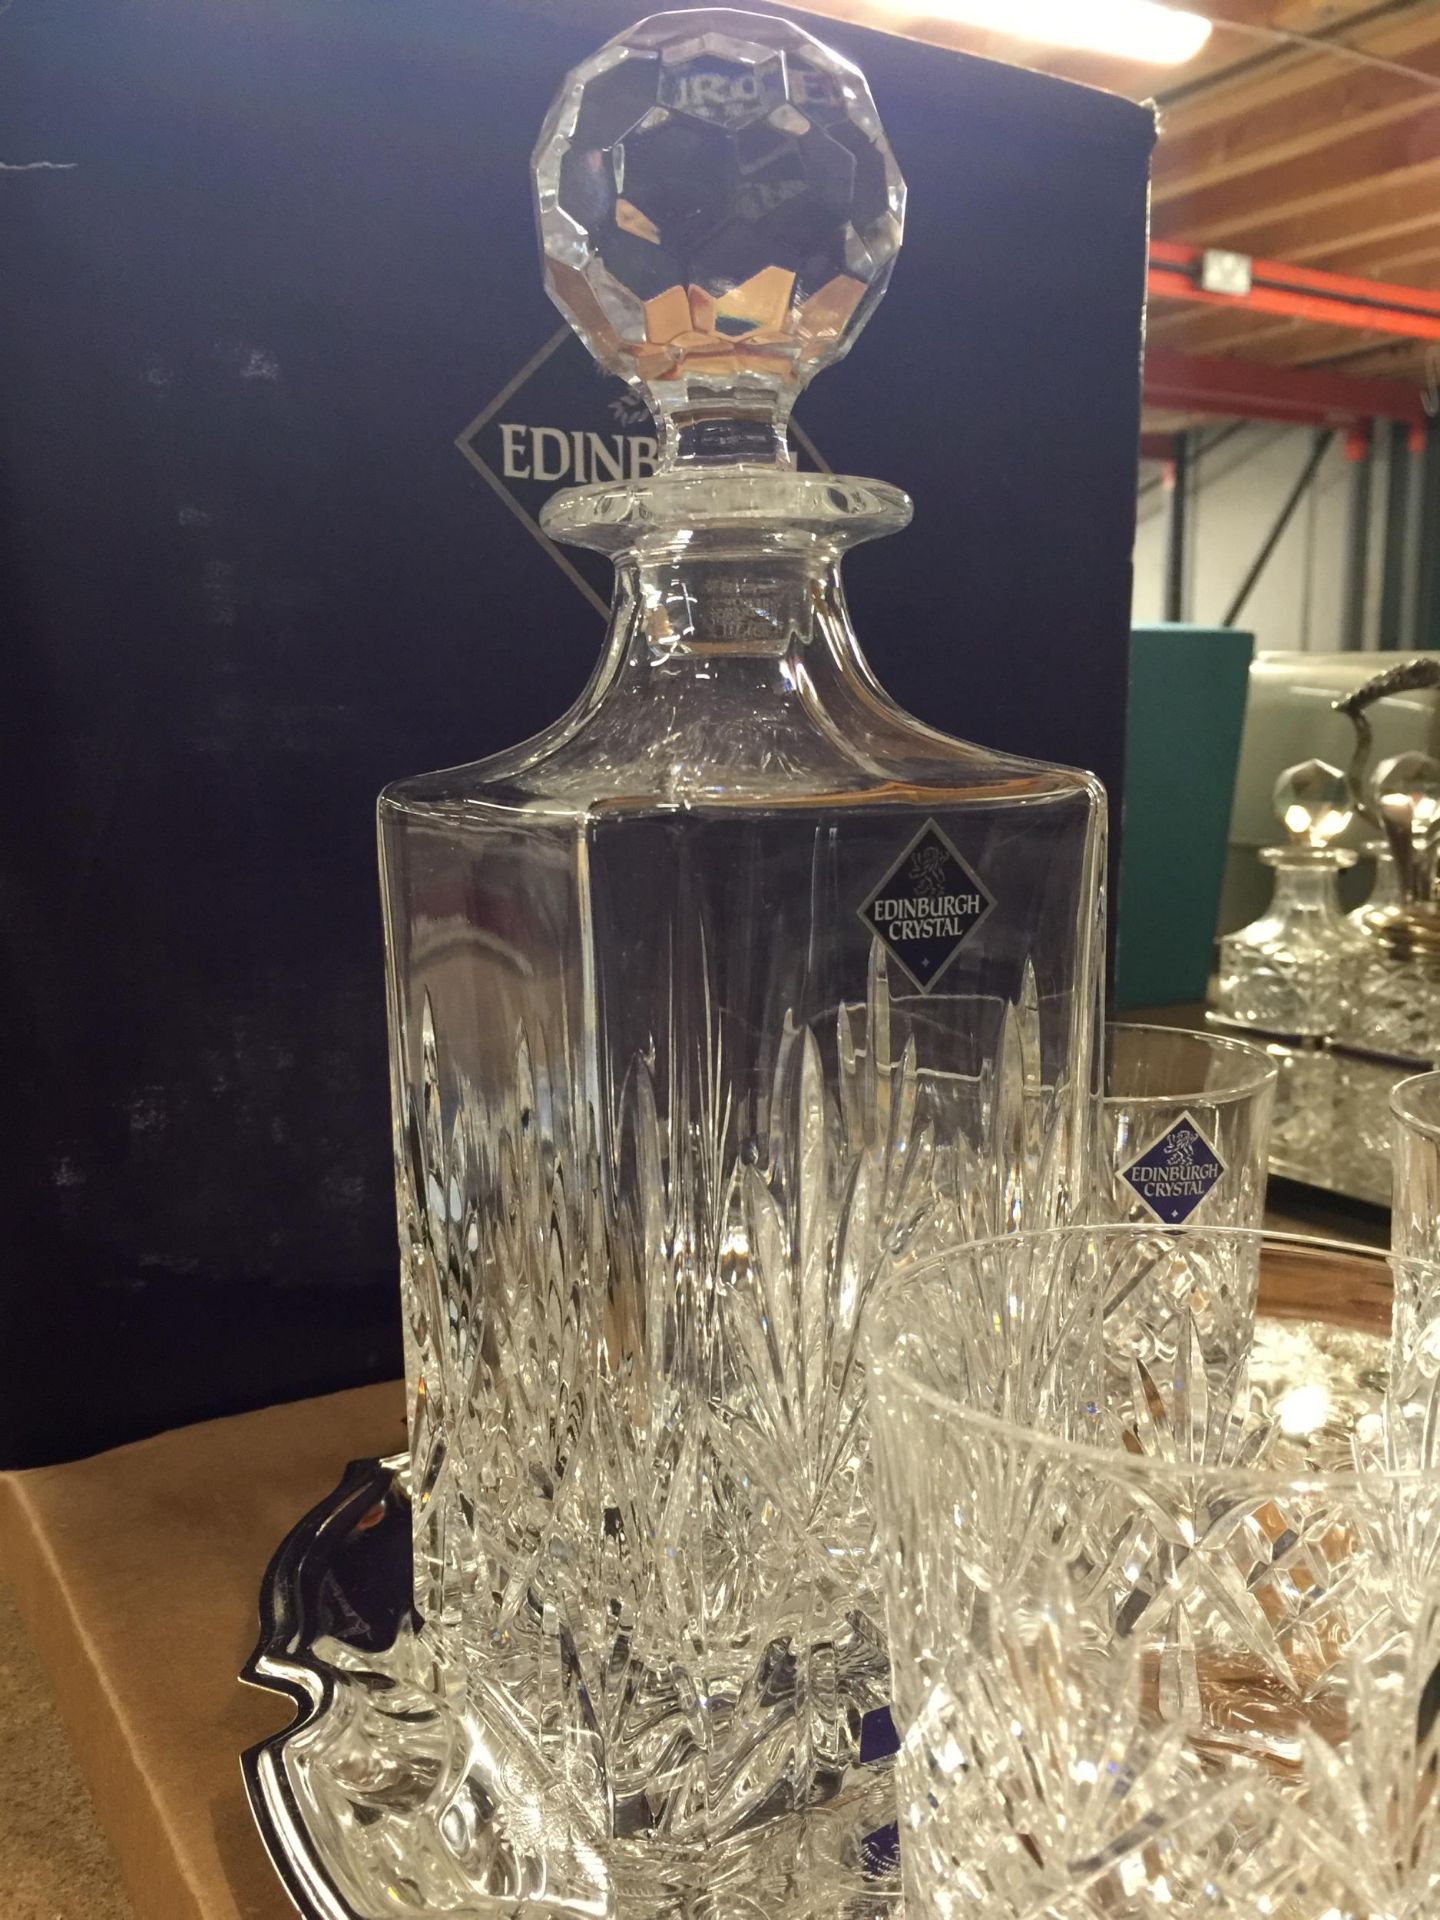 AN EDINBURGH CRYSTAL WHISKY DECANTER, FOUR WHISKY GLASSES AND A SILVER PLATED TRAY - BOXED - Image 2 of 4